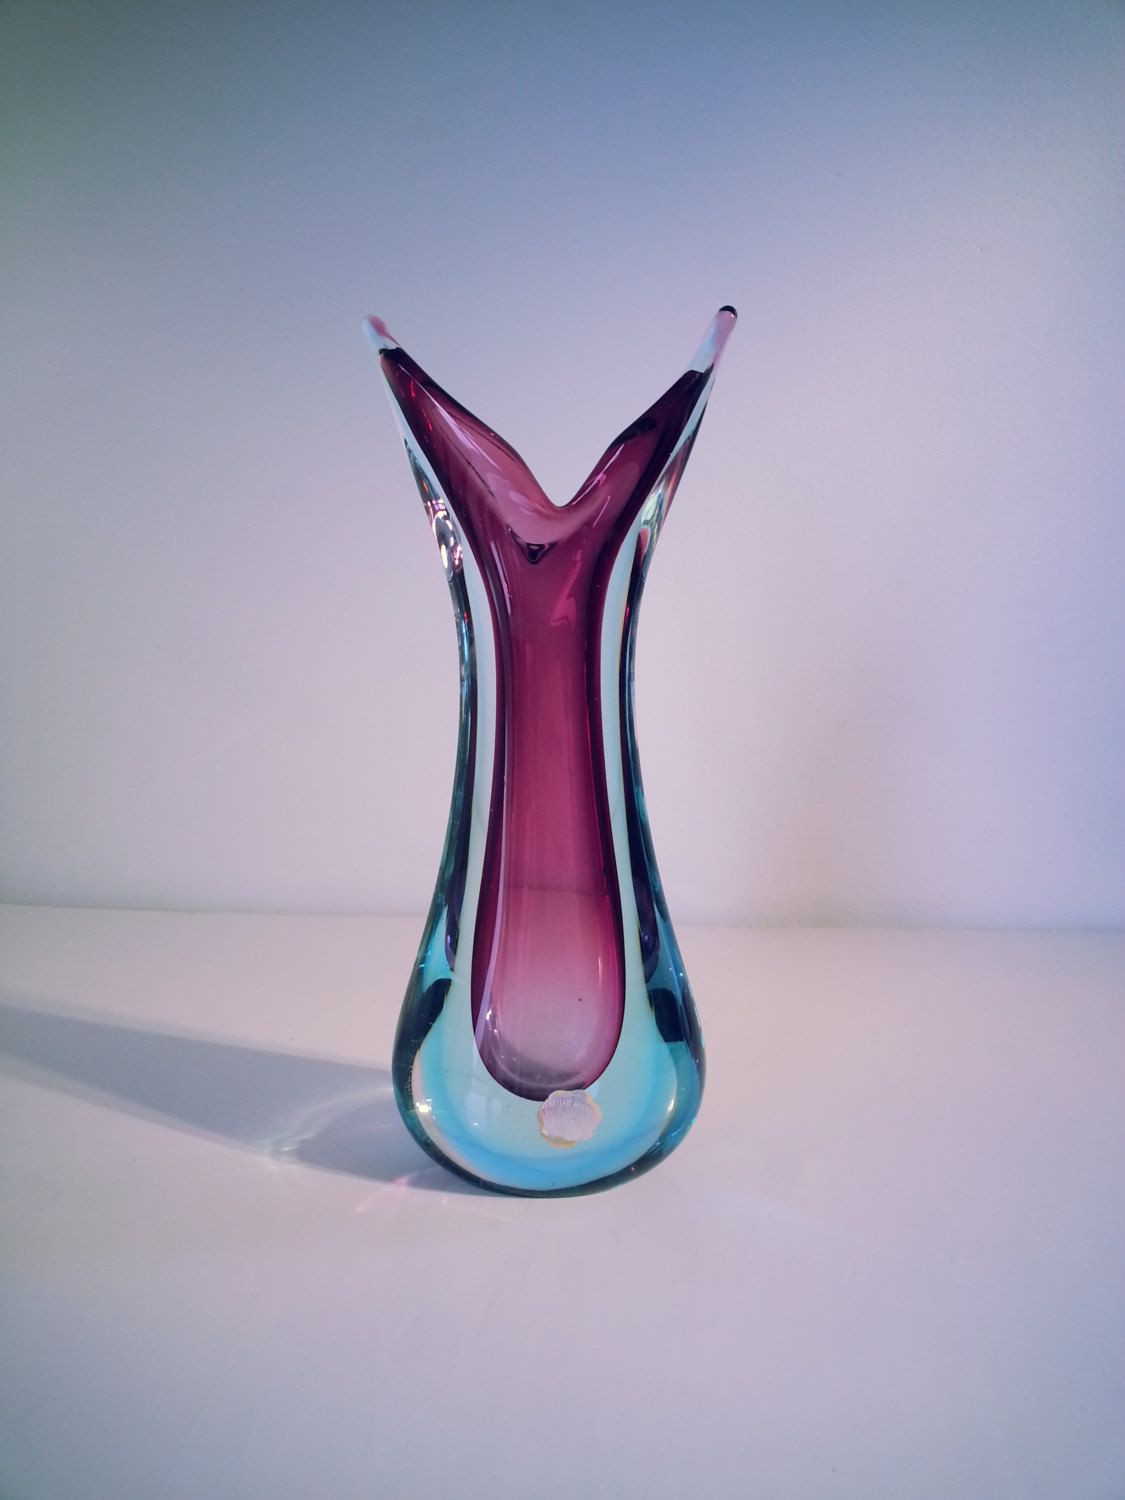 17 Great Tall Narrow Glass Vase 2024 free download tall narrow glass vase of murano sommerso genuine venetian glass 1950s 1960s purple blue throughout murano sommerso genuine venetian glass 1950s 1960s purple blue glass vase pulled design va